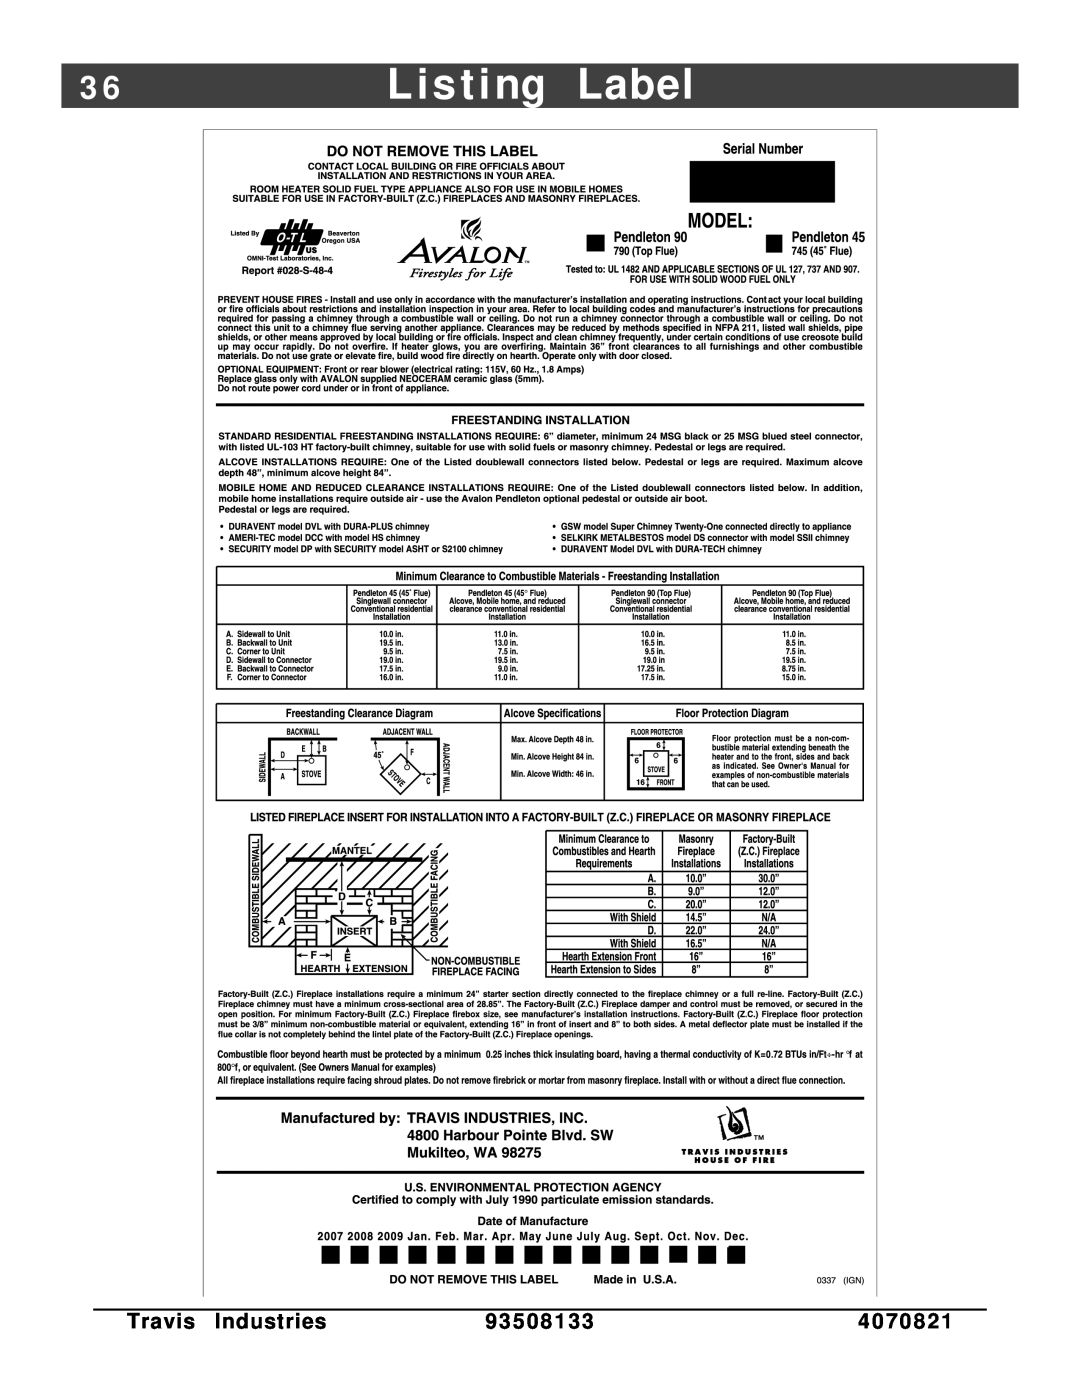 Avalon Stoves 790, 745 owner manual Listing Label, Travis, Industries, 93508133 